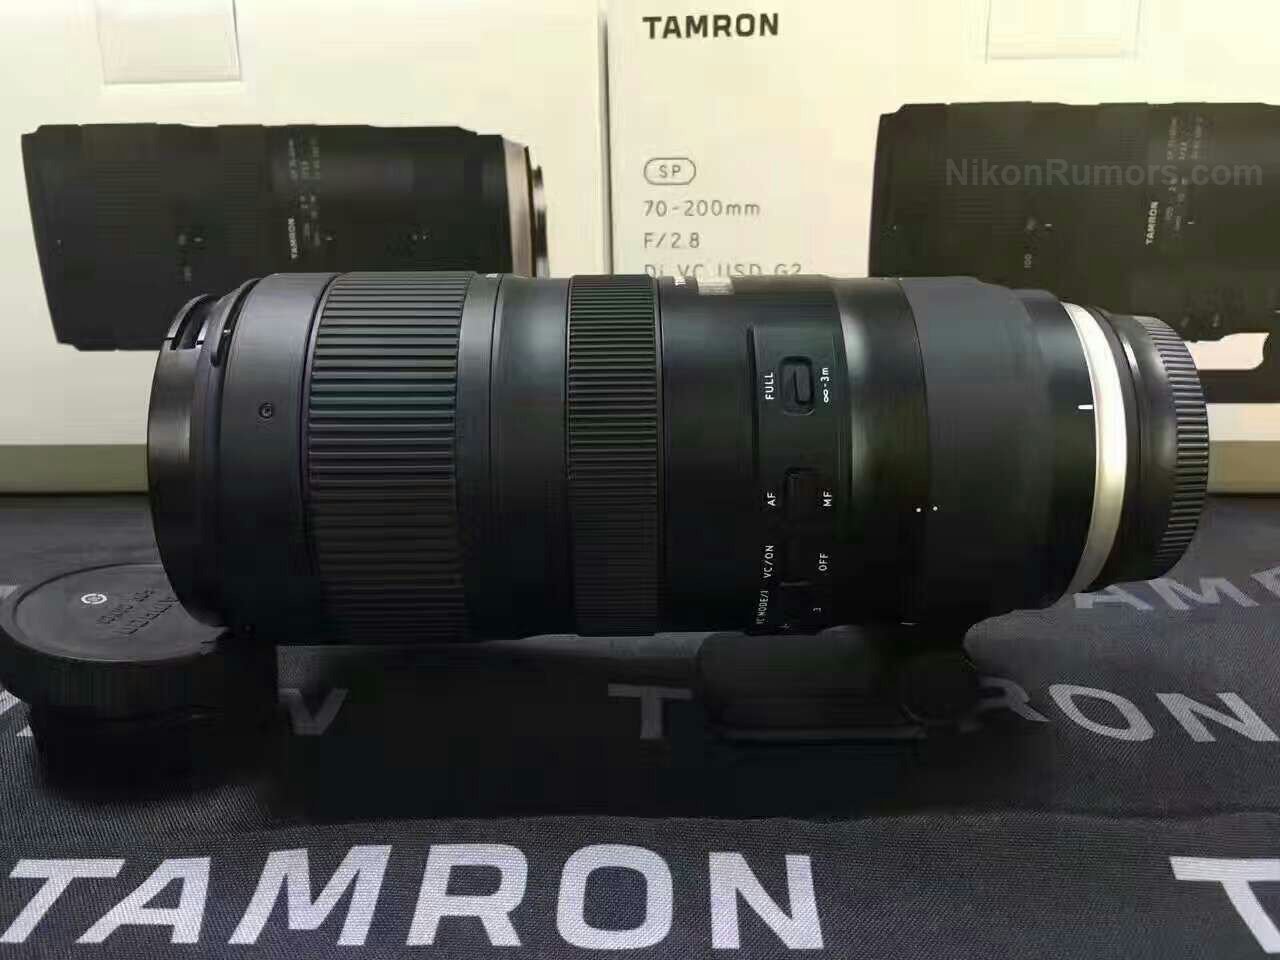 First Photos of New Tamron 70-200mm f/2.8 Lens Leaked | PetaPixel